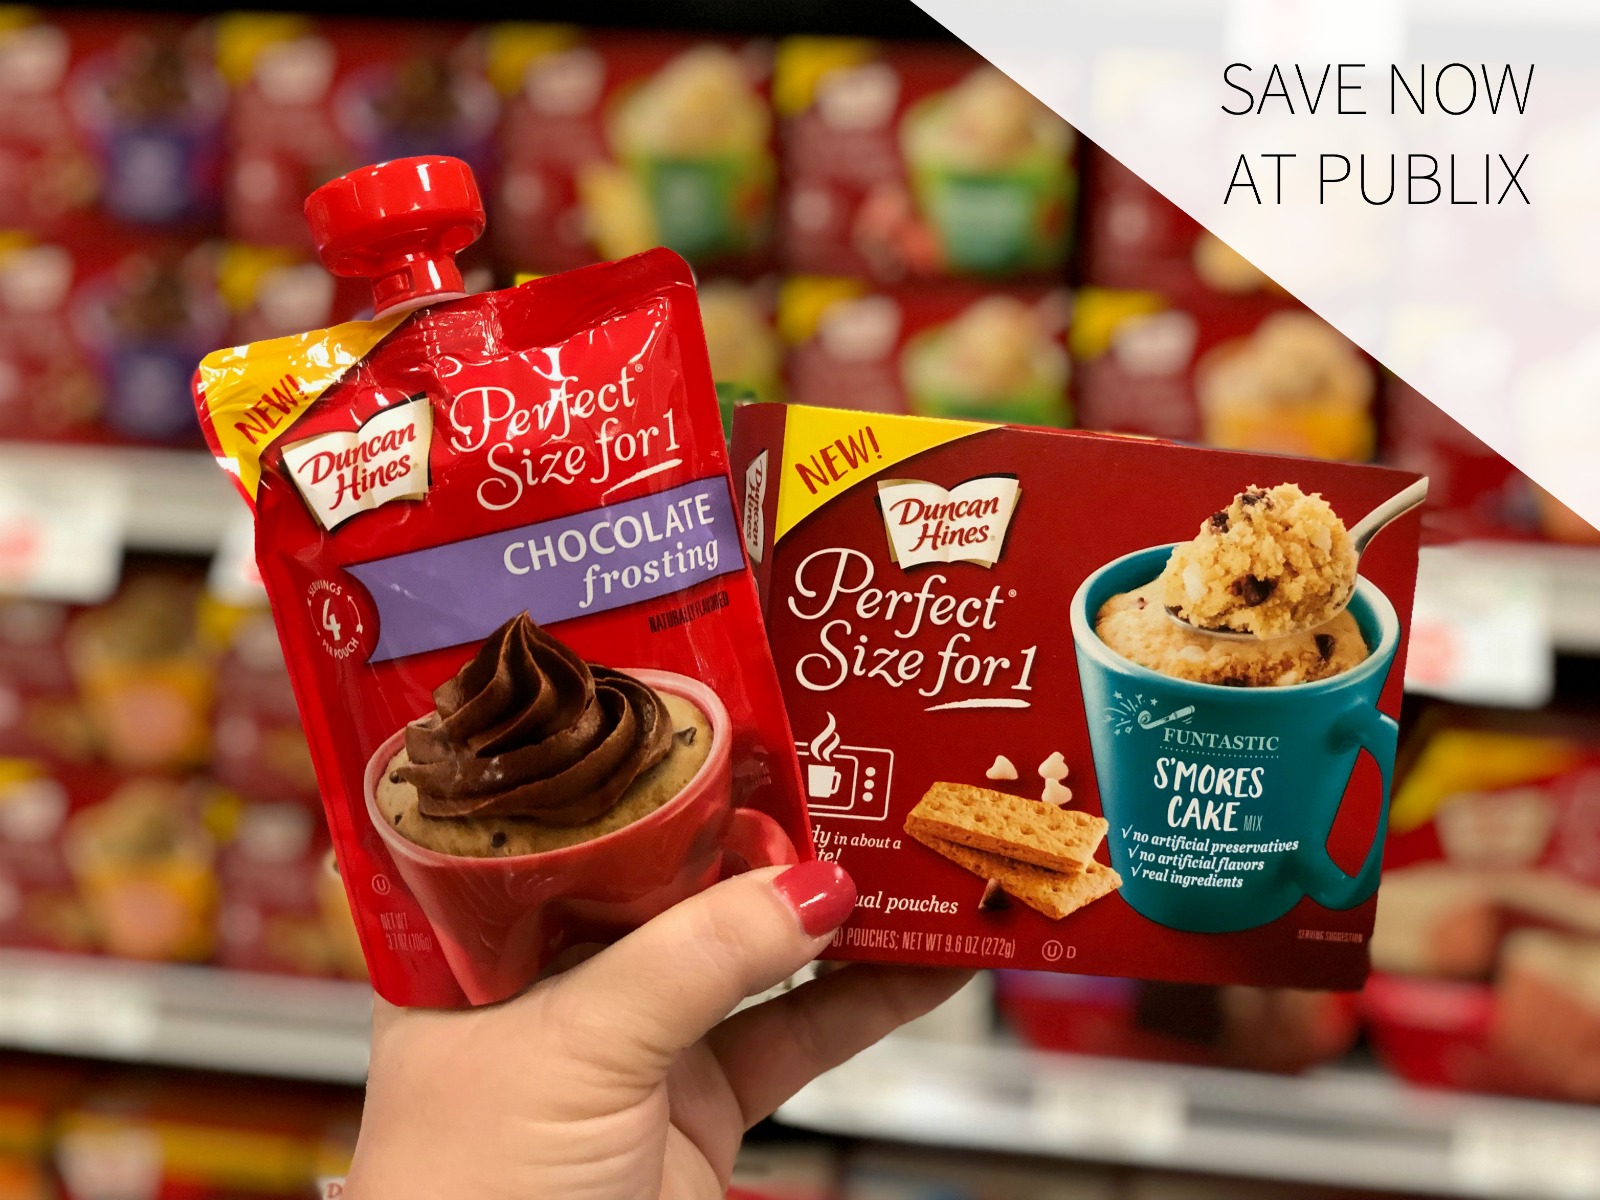 Grab A Great Deal On Duncan Hines® Perfect Size for 1® At Publix + Get A Free Topping!